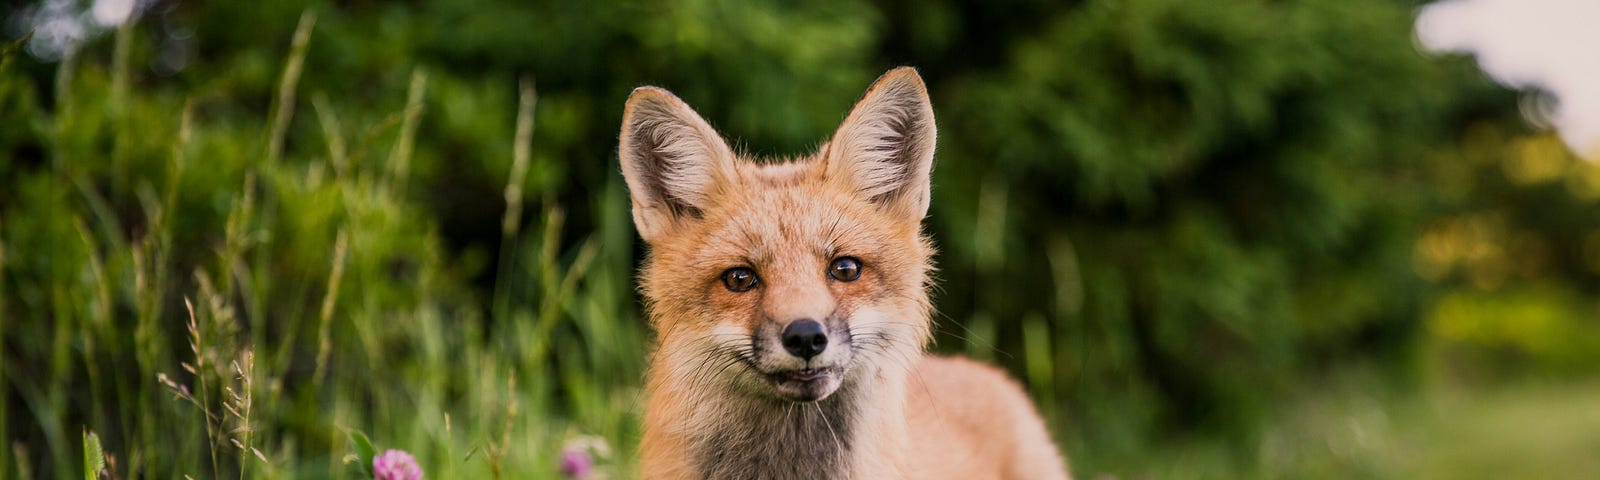 red fox in park